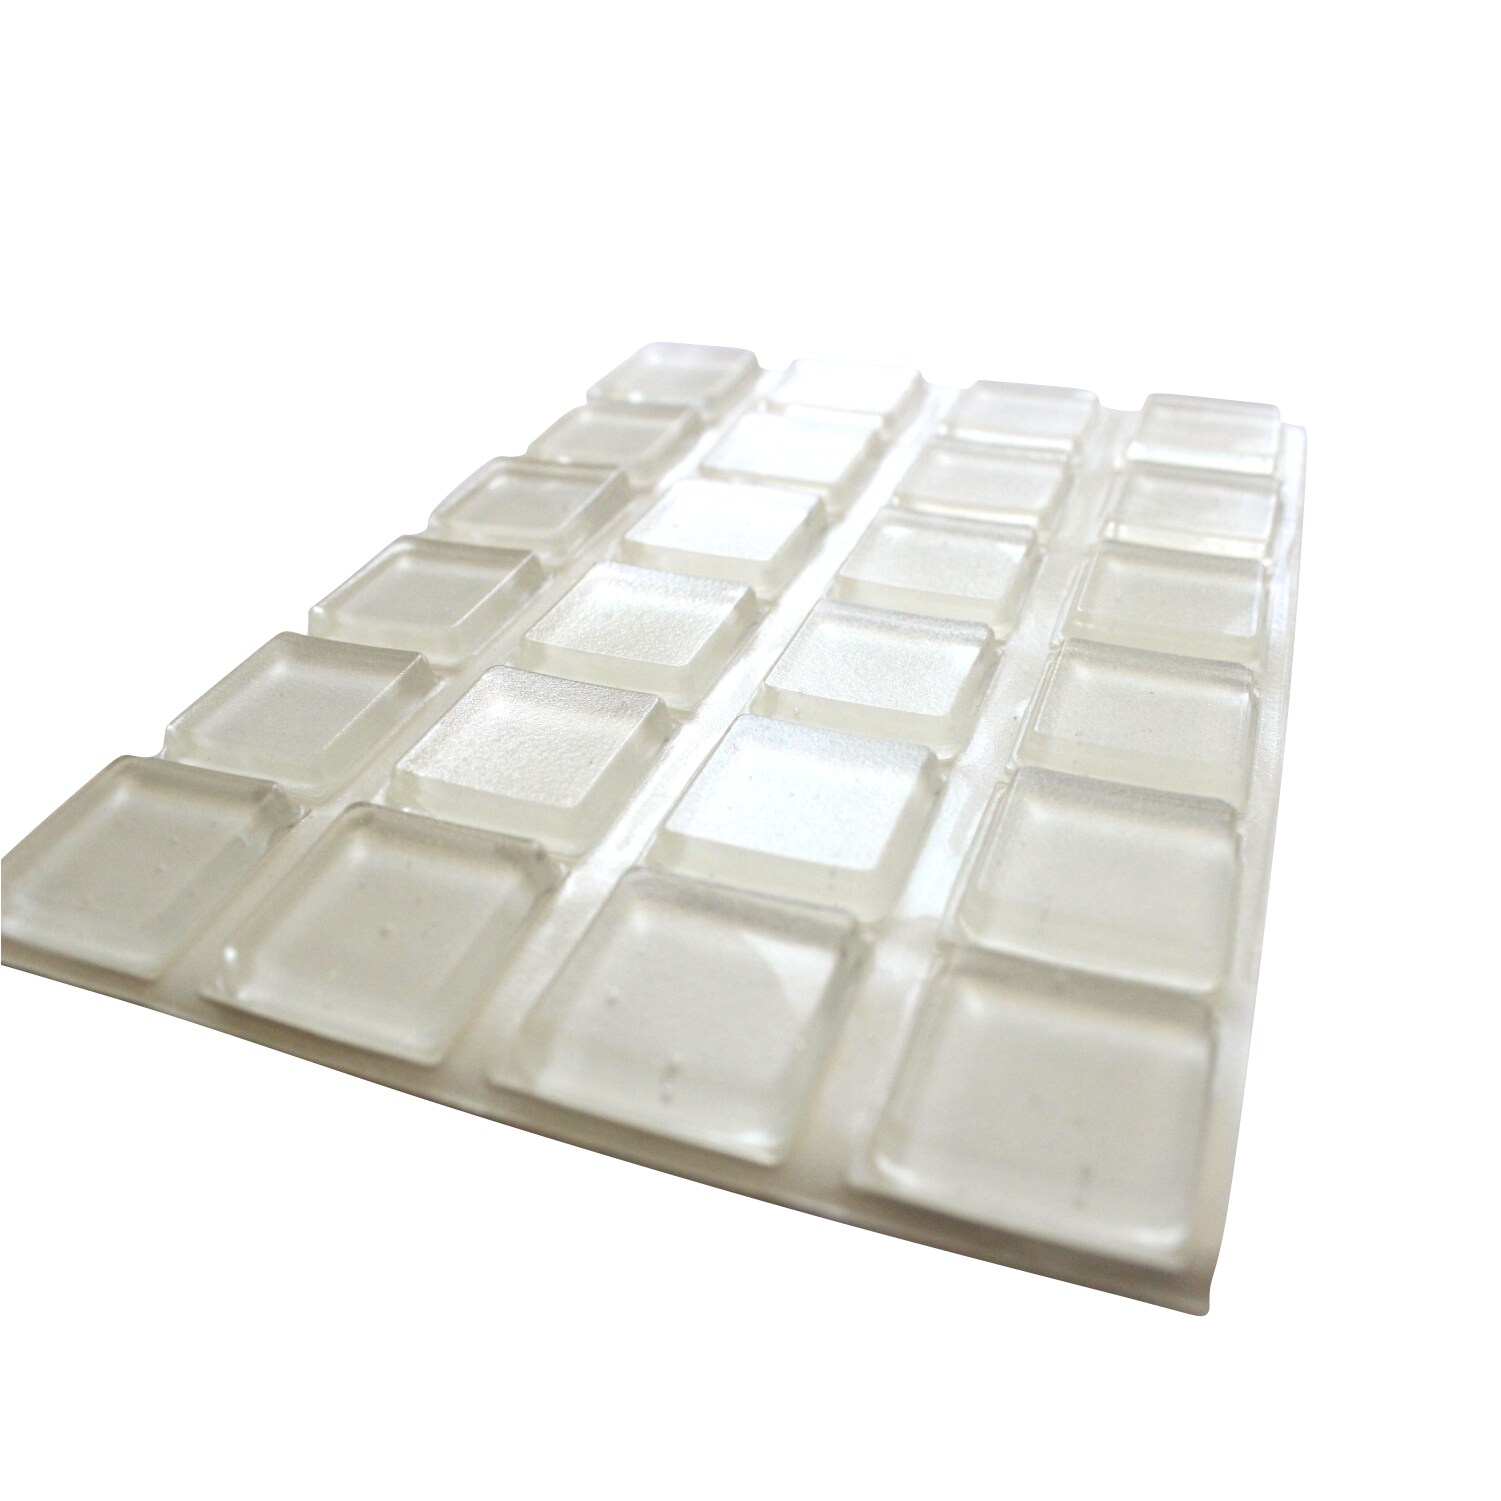 https://ak1.ostkcdn.com/images/products/11768770/Rok-Hardware-Large-Clear-Square-Self-Adhesive-Rubber-Bumpers-1-inch-x-0.18-inch-25-Pack-ca6d7ae8-e289-40b5-94c3-ae8ae2fd0f83.jpg